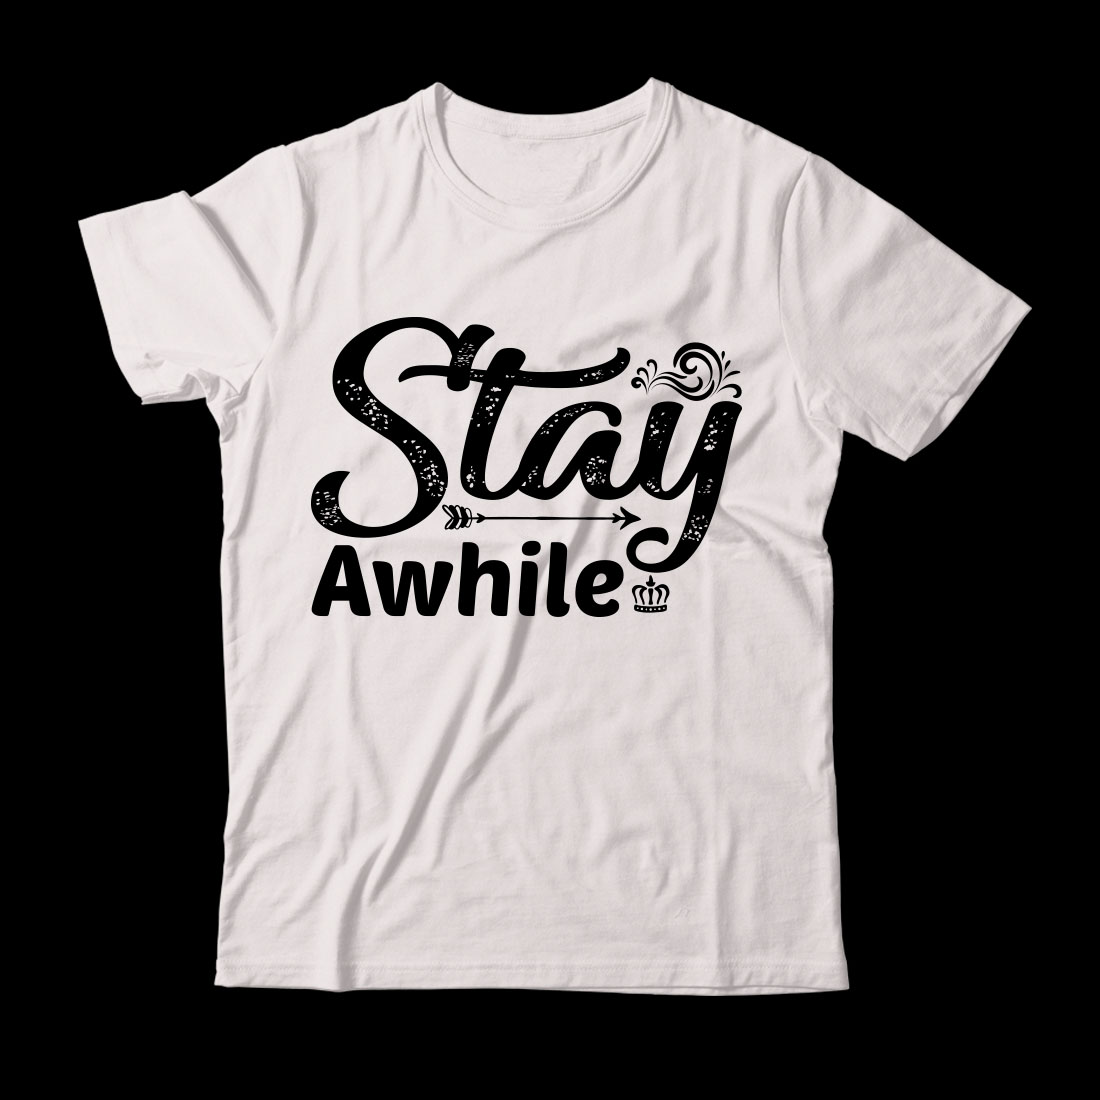 White t - shirt that says stay awhile.